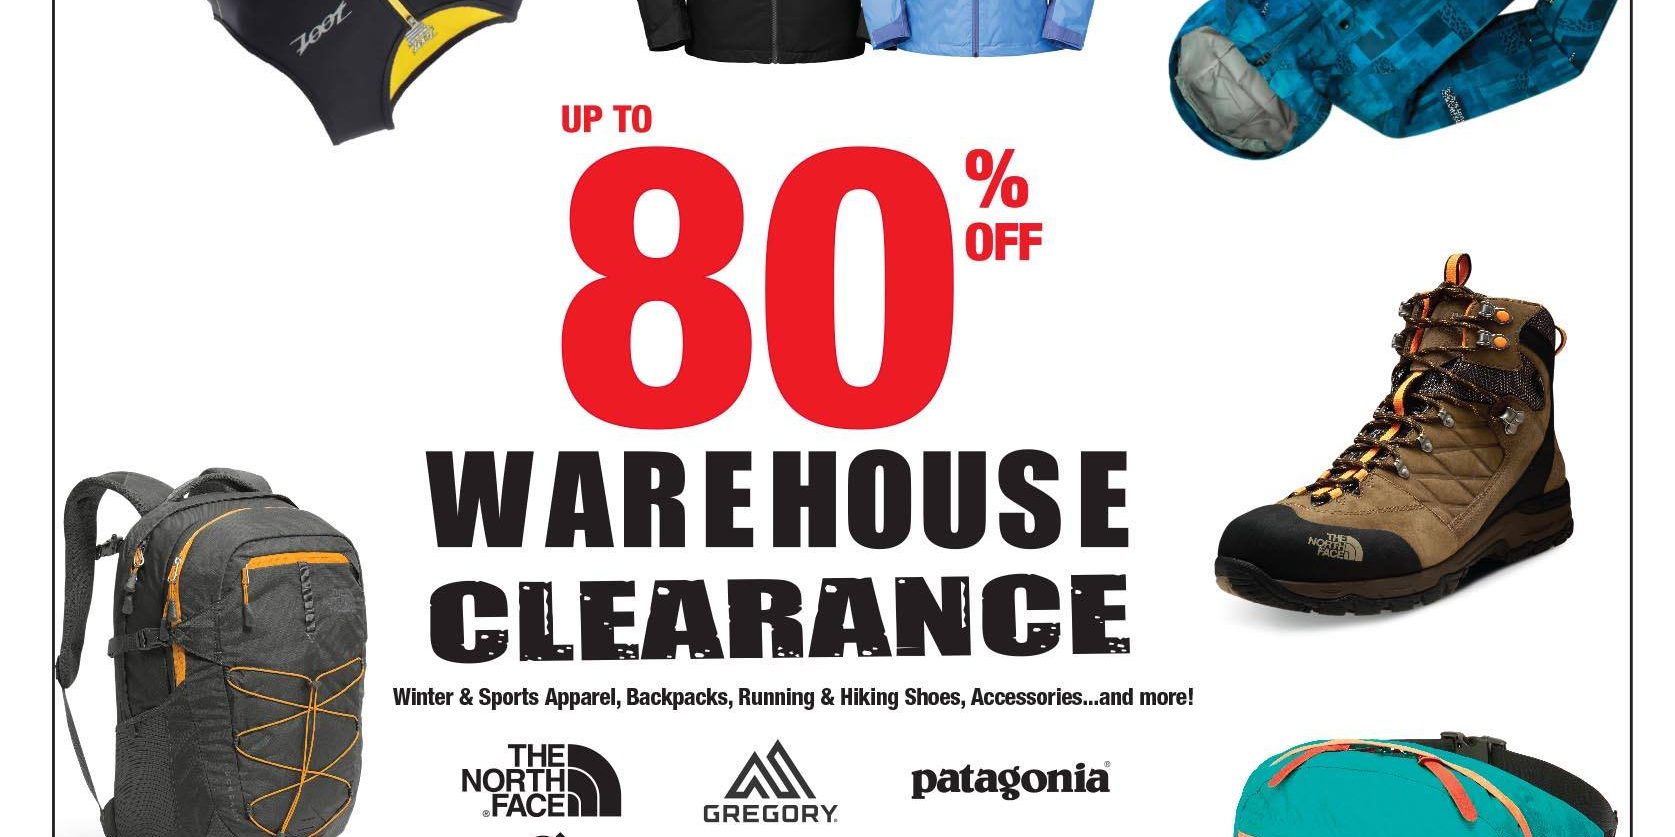 Running Lab Singapore Warehouse Clearance Sale Up to 80% Off Promotion 27-30 Apr 2017